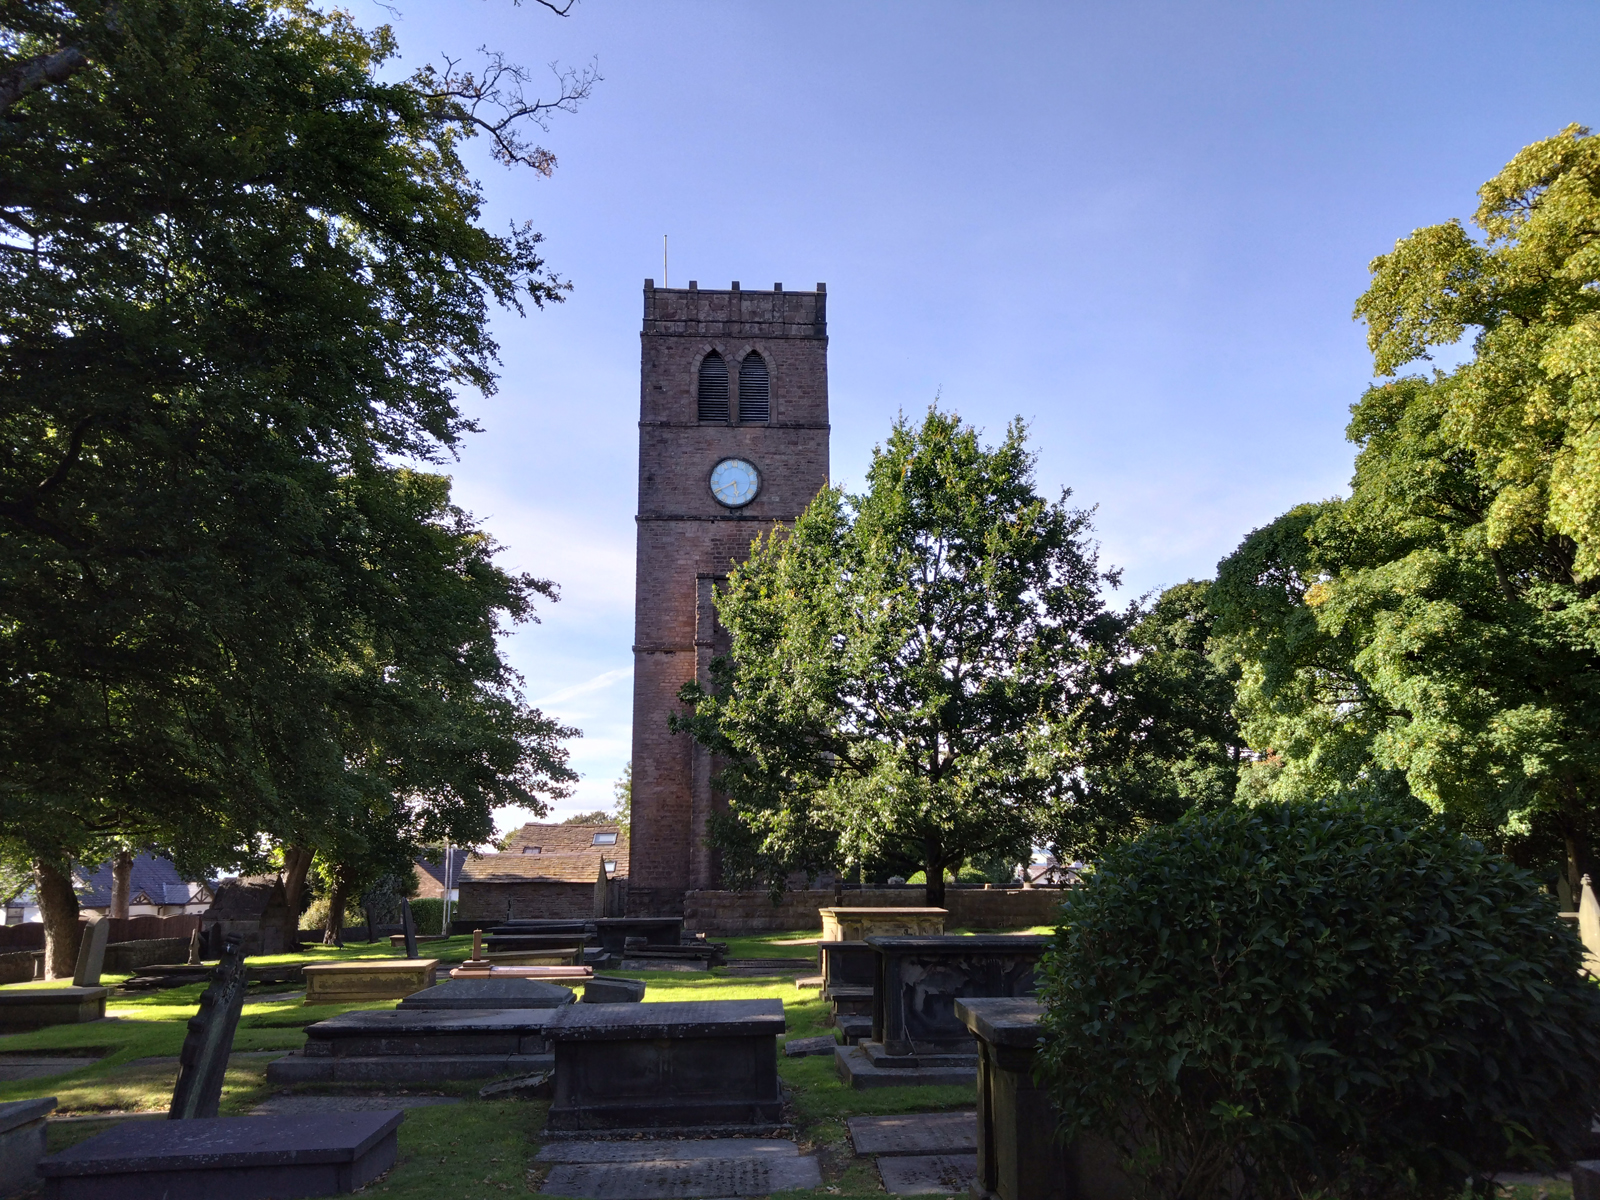 Sony Xperia 10 IV camera sample showing a church tower and trees